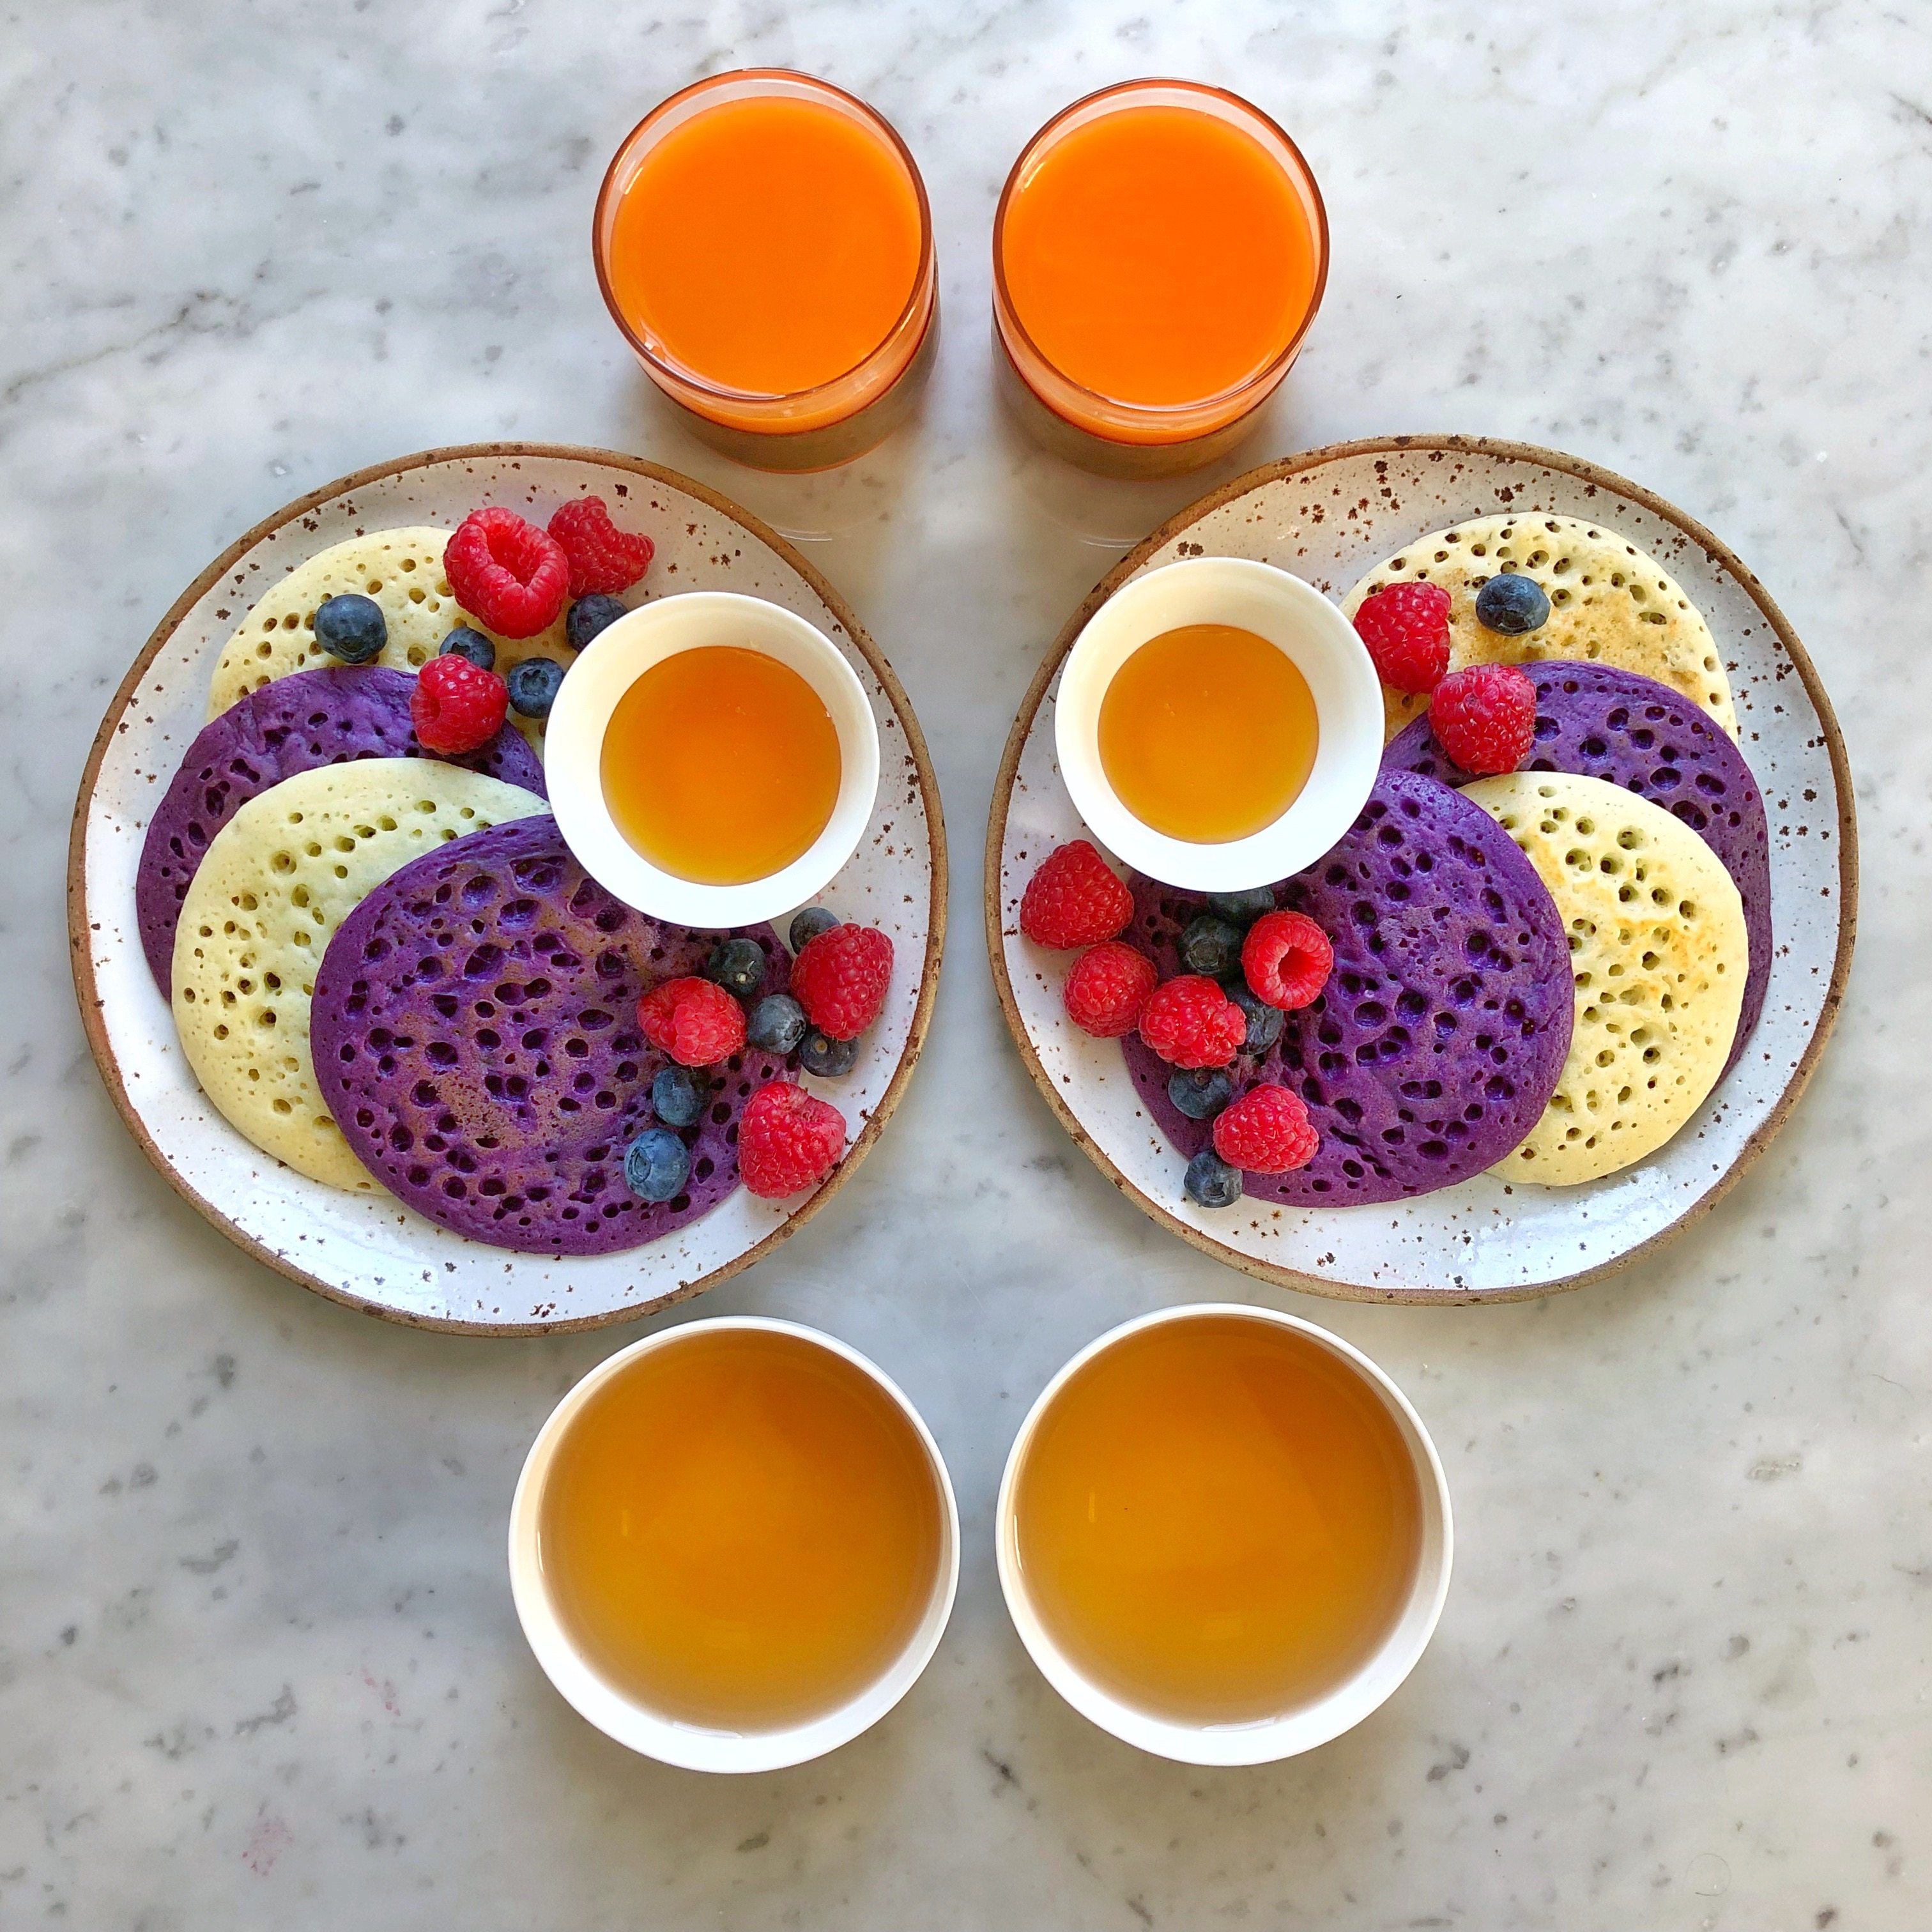 Michael Zee, famous for his symmetrical breakfasts, has authored a cookbook called SymmetryBreakfast. Photo: Michael Zee